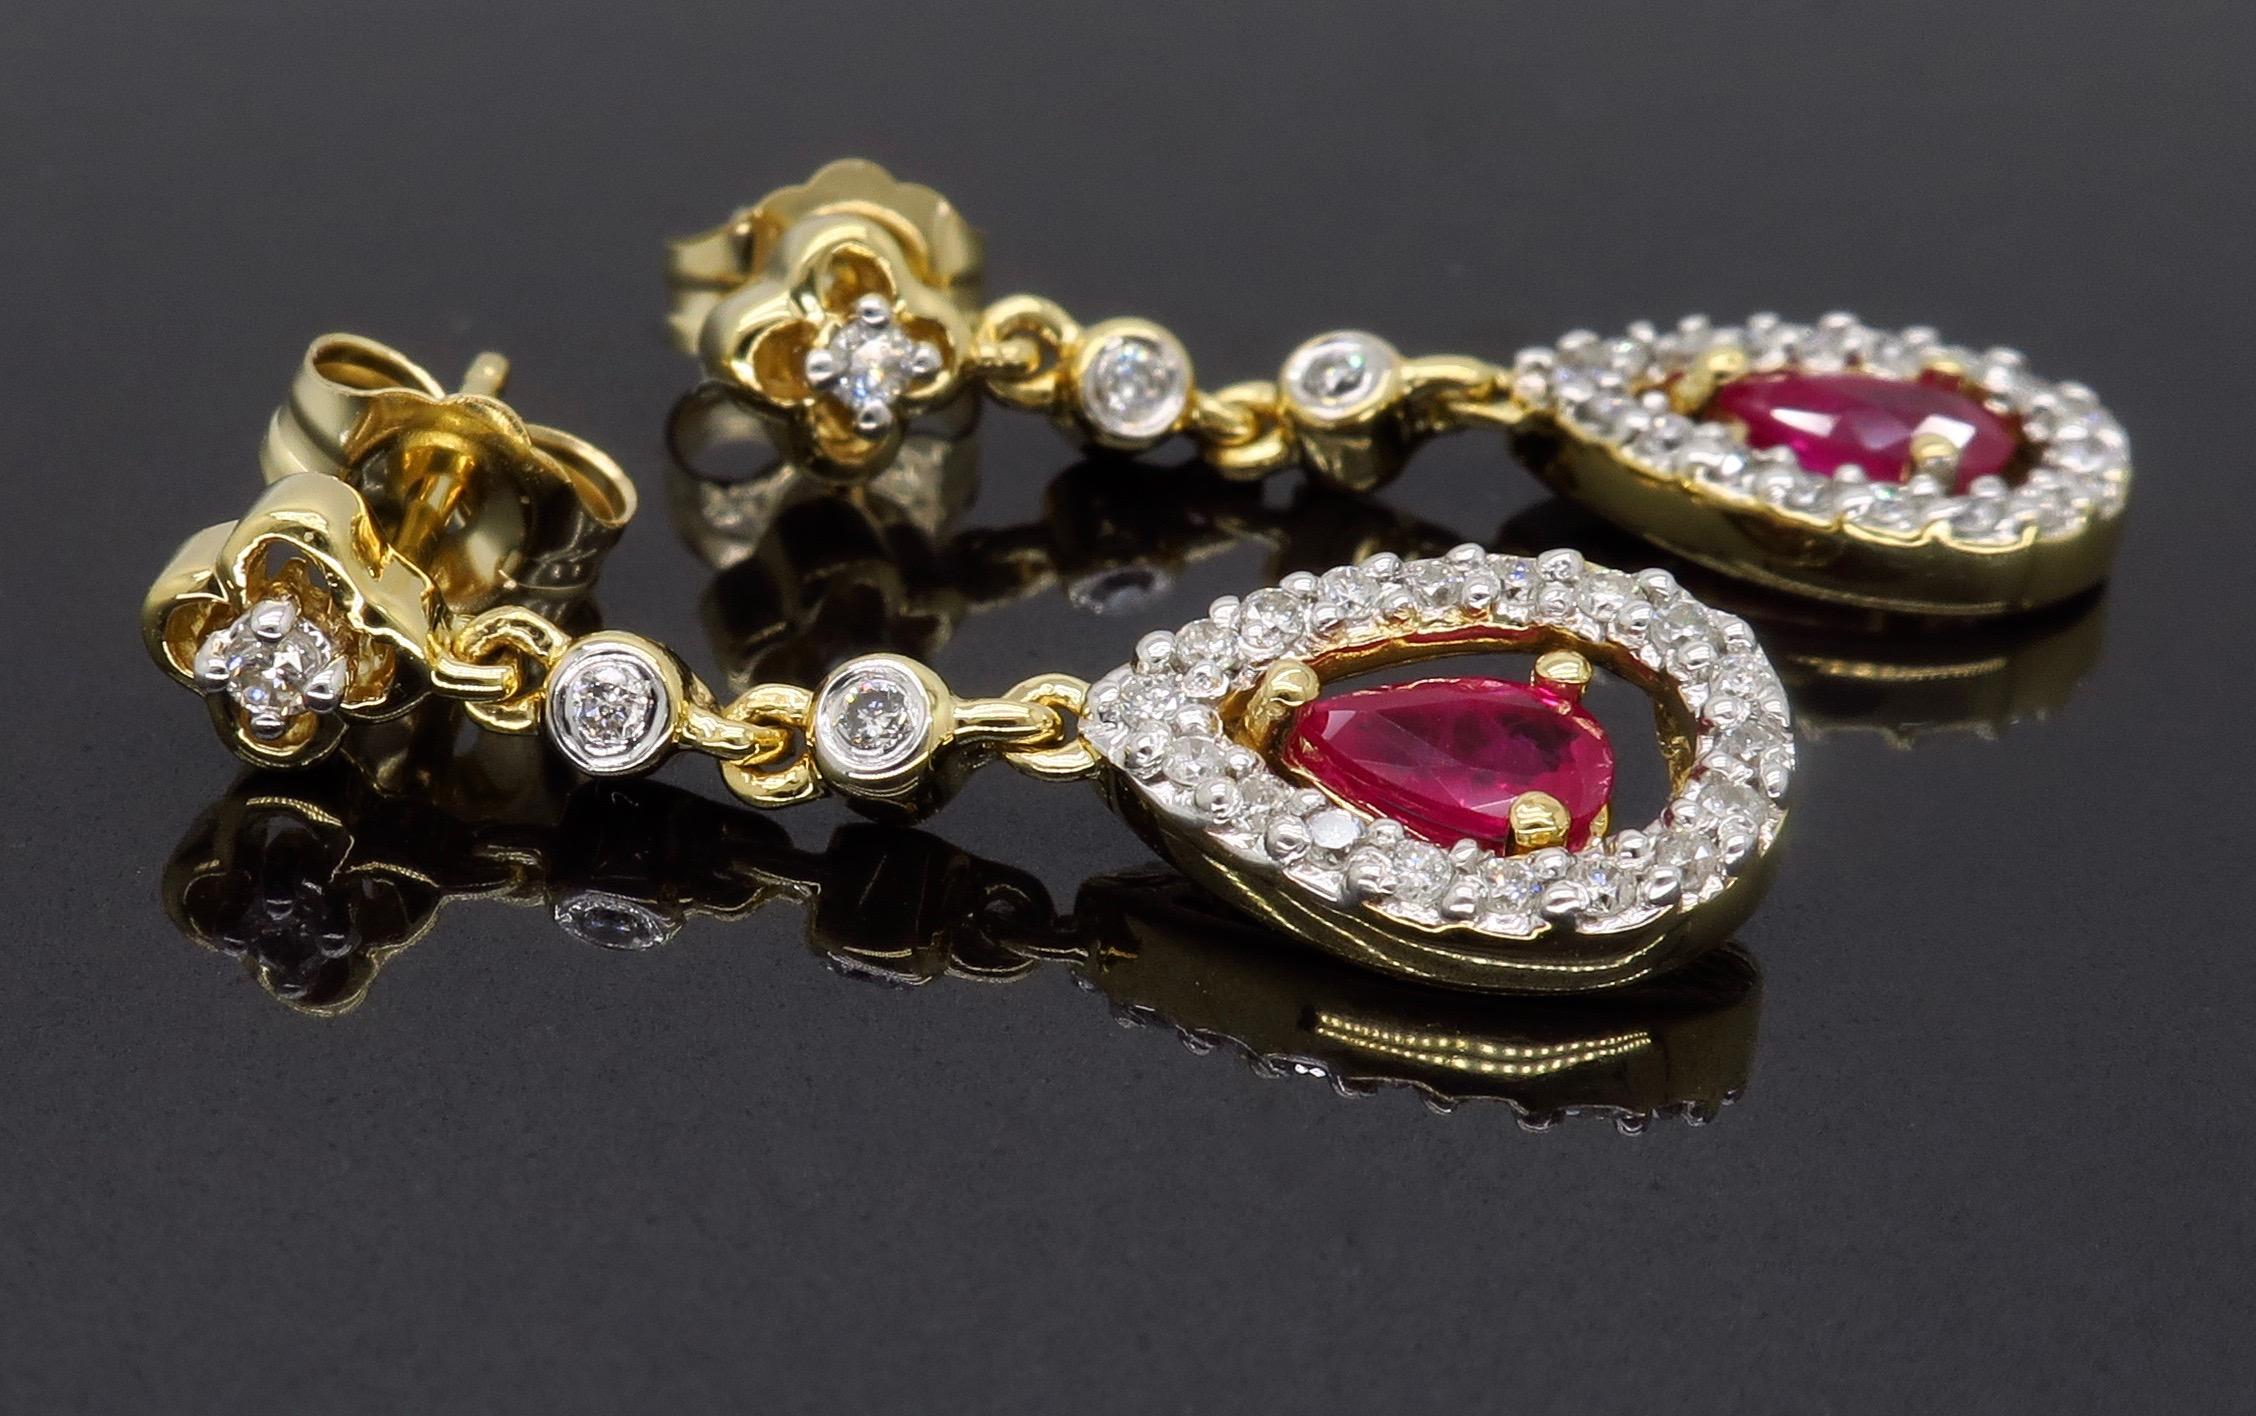 Ruby earrings complimented by a halo of Round Brilliant Cut diamonds.

Gemstone: Ruby  & Diamond
Gemstone Carat Weight: Approximately 4.3x2.9mm Pear Shaped
Diamond Cut: Round Brilliant Cut Diamonds
Average Diamond Color: G-J
Average Diamond Clarity: